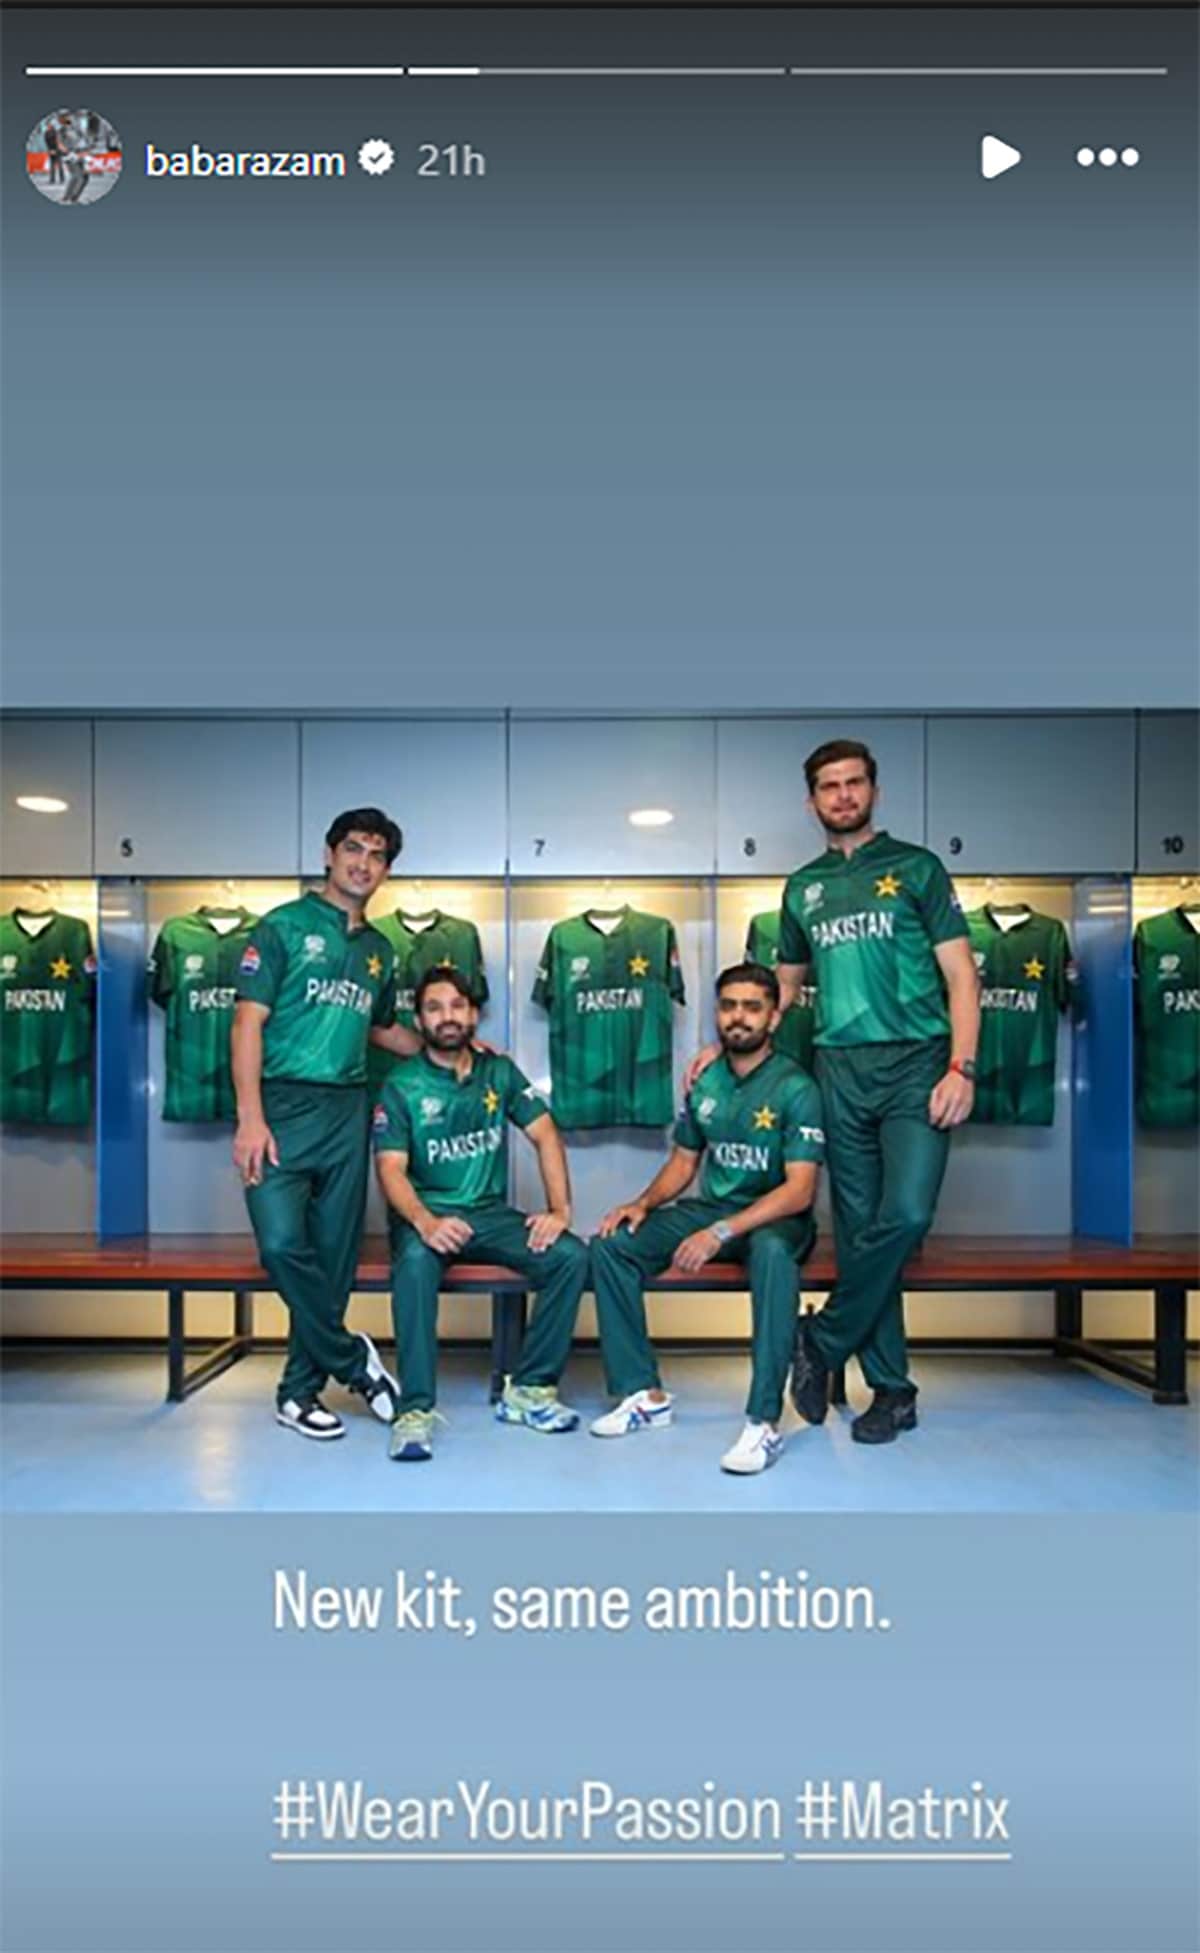 Pakistan Unveils Jersey For T20 World Cup; Babar Azam Says, “New Kit, Same Ambition”: